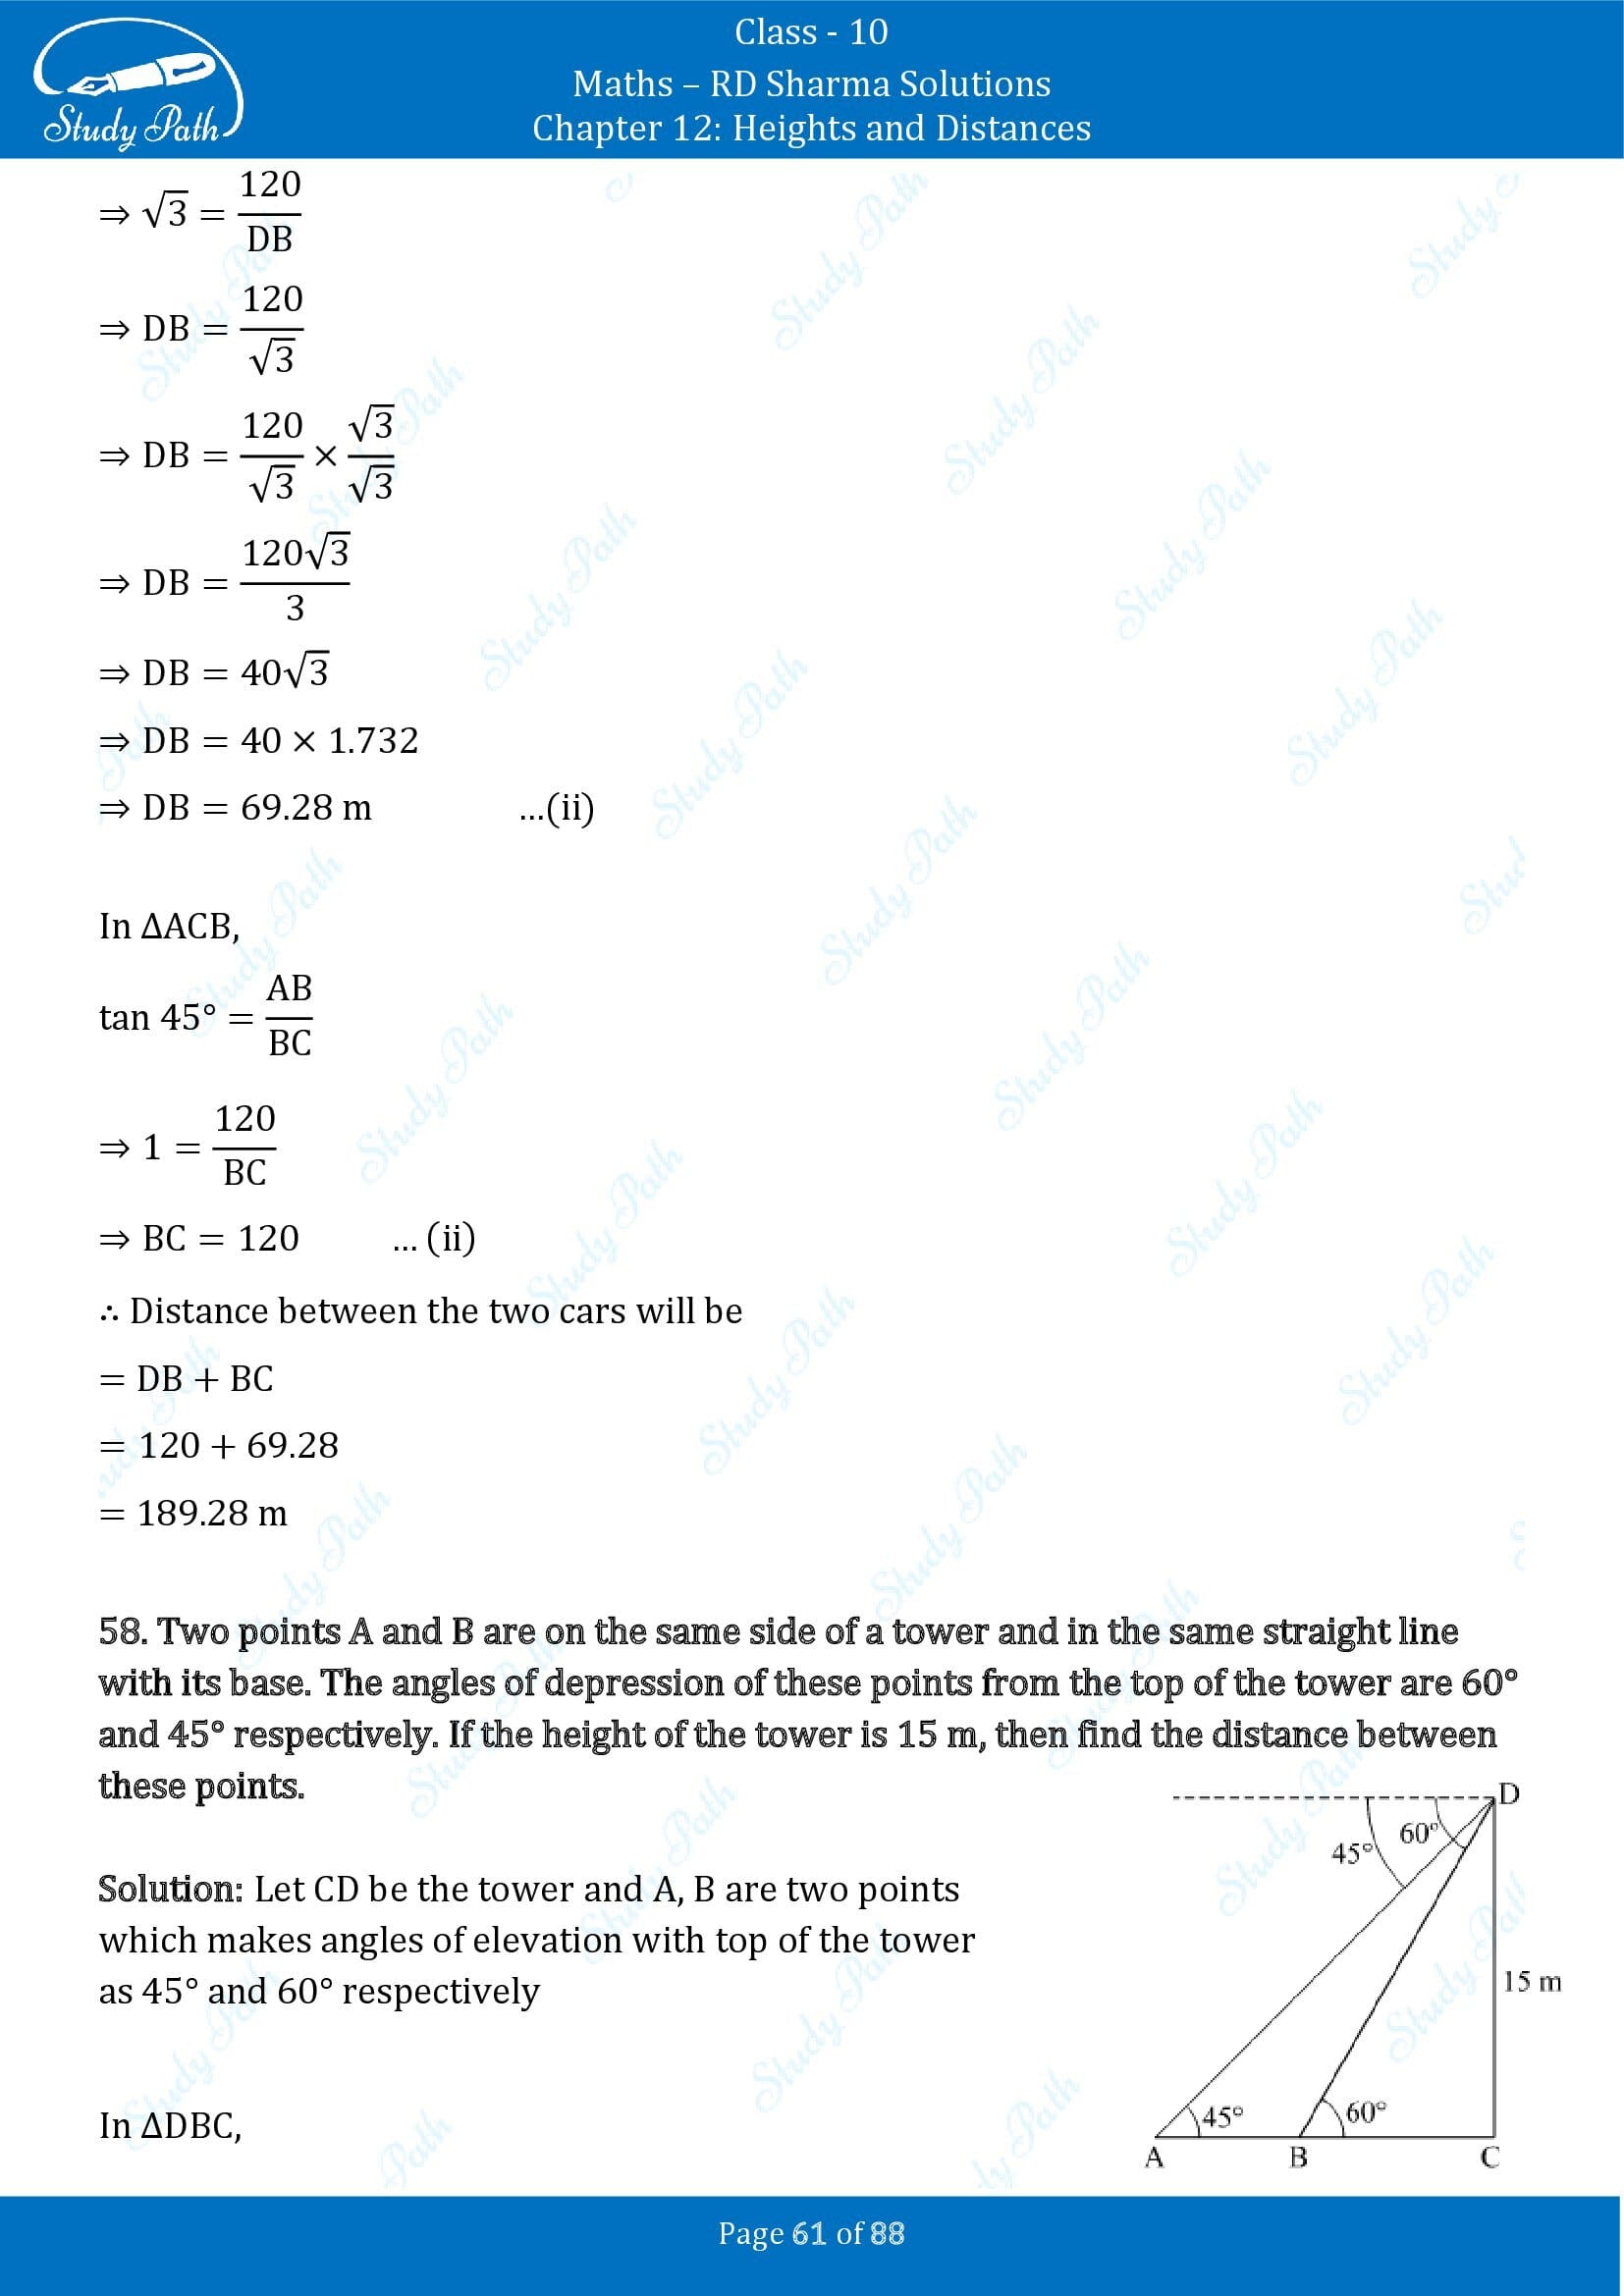 RD Sharma Solutions Class 10 Chapter 12 Heights and Distances Exercise 12.1 00061